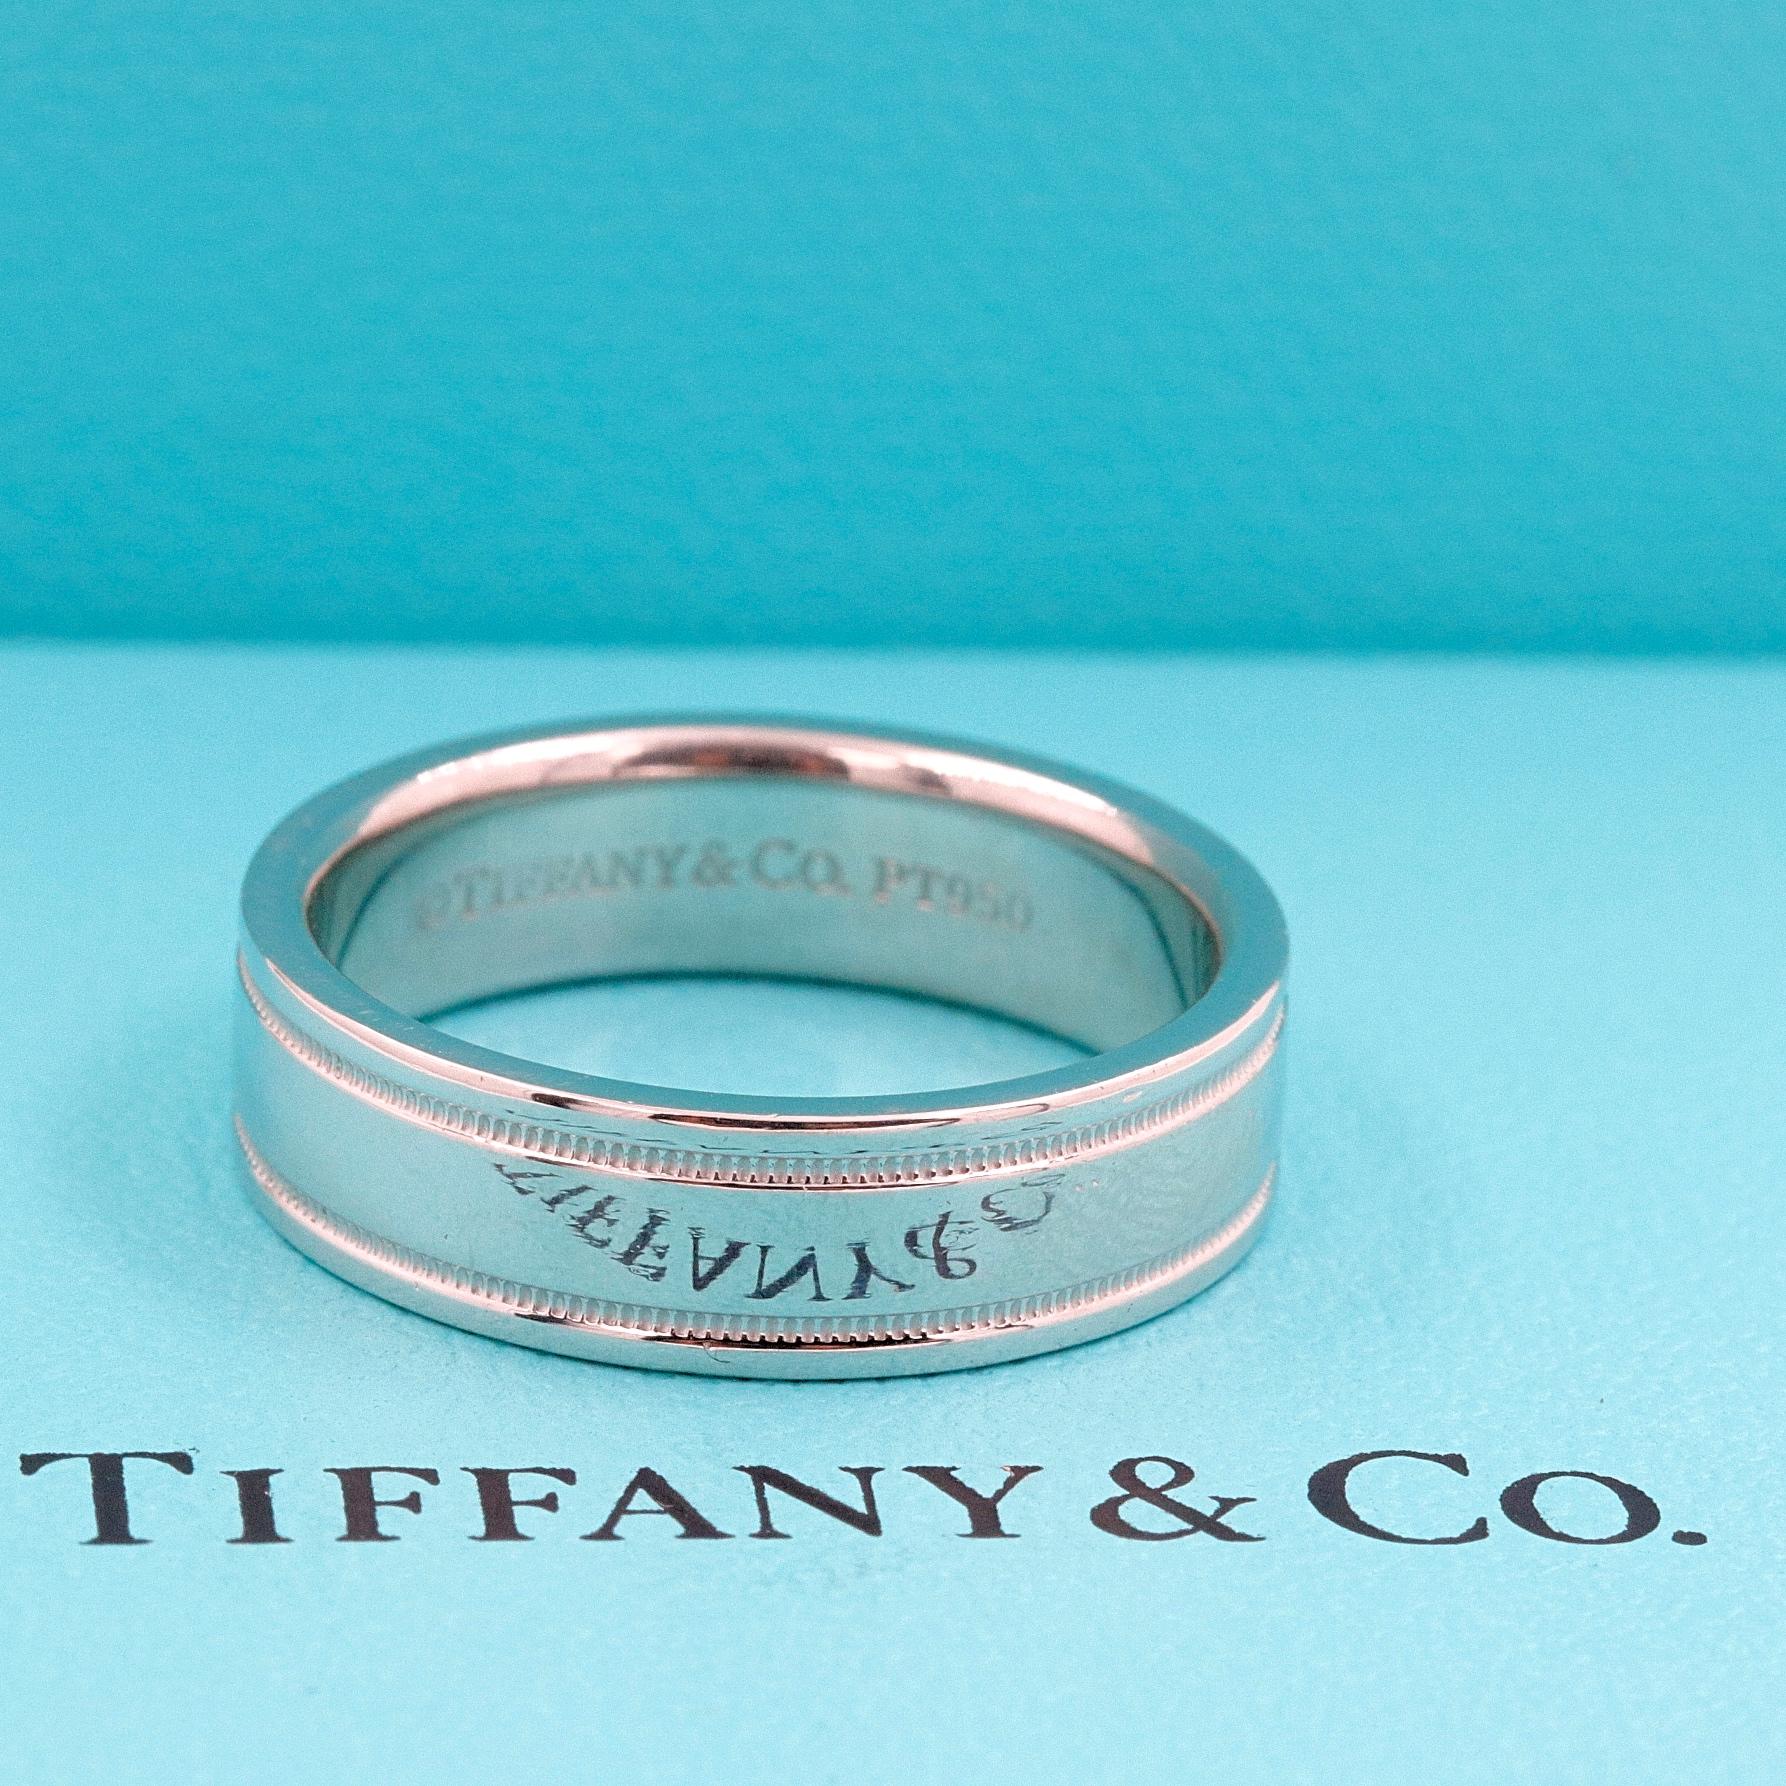 TIFFANY & CO Essential Wedding Band Ring

Style:  Double Milgrain
Metal:  Platinum PT950
Size:  8.25 - sizable
Width:  6 MM
Hallmark:  ©TIFFANY&CO.PT950
Includes:  T&C Ring Pouch

Retail Value:  $2,325

SKU#1300TGC050819-8.25SZ-KK
